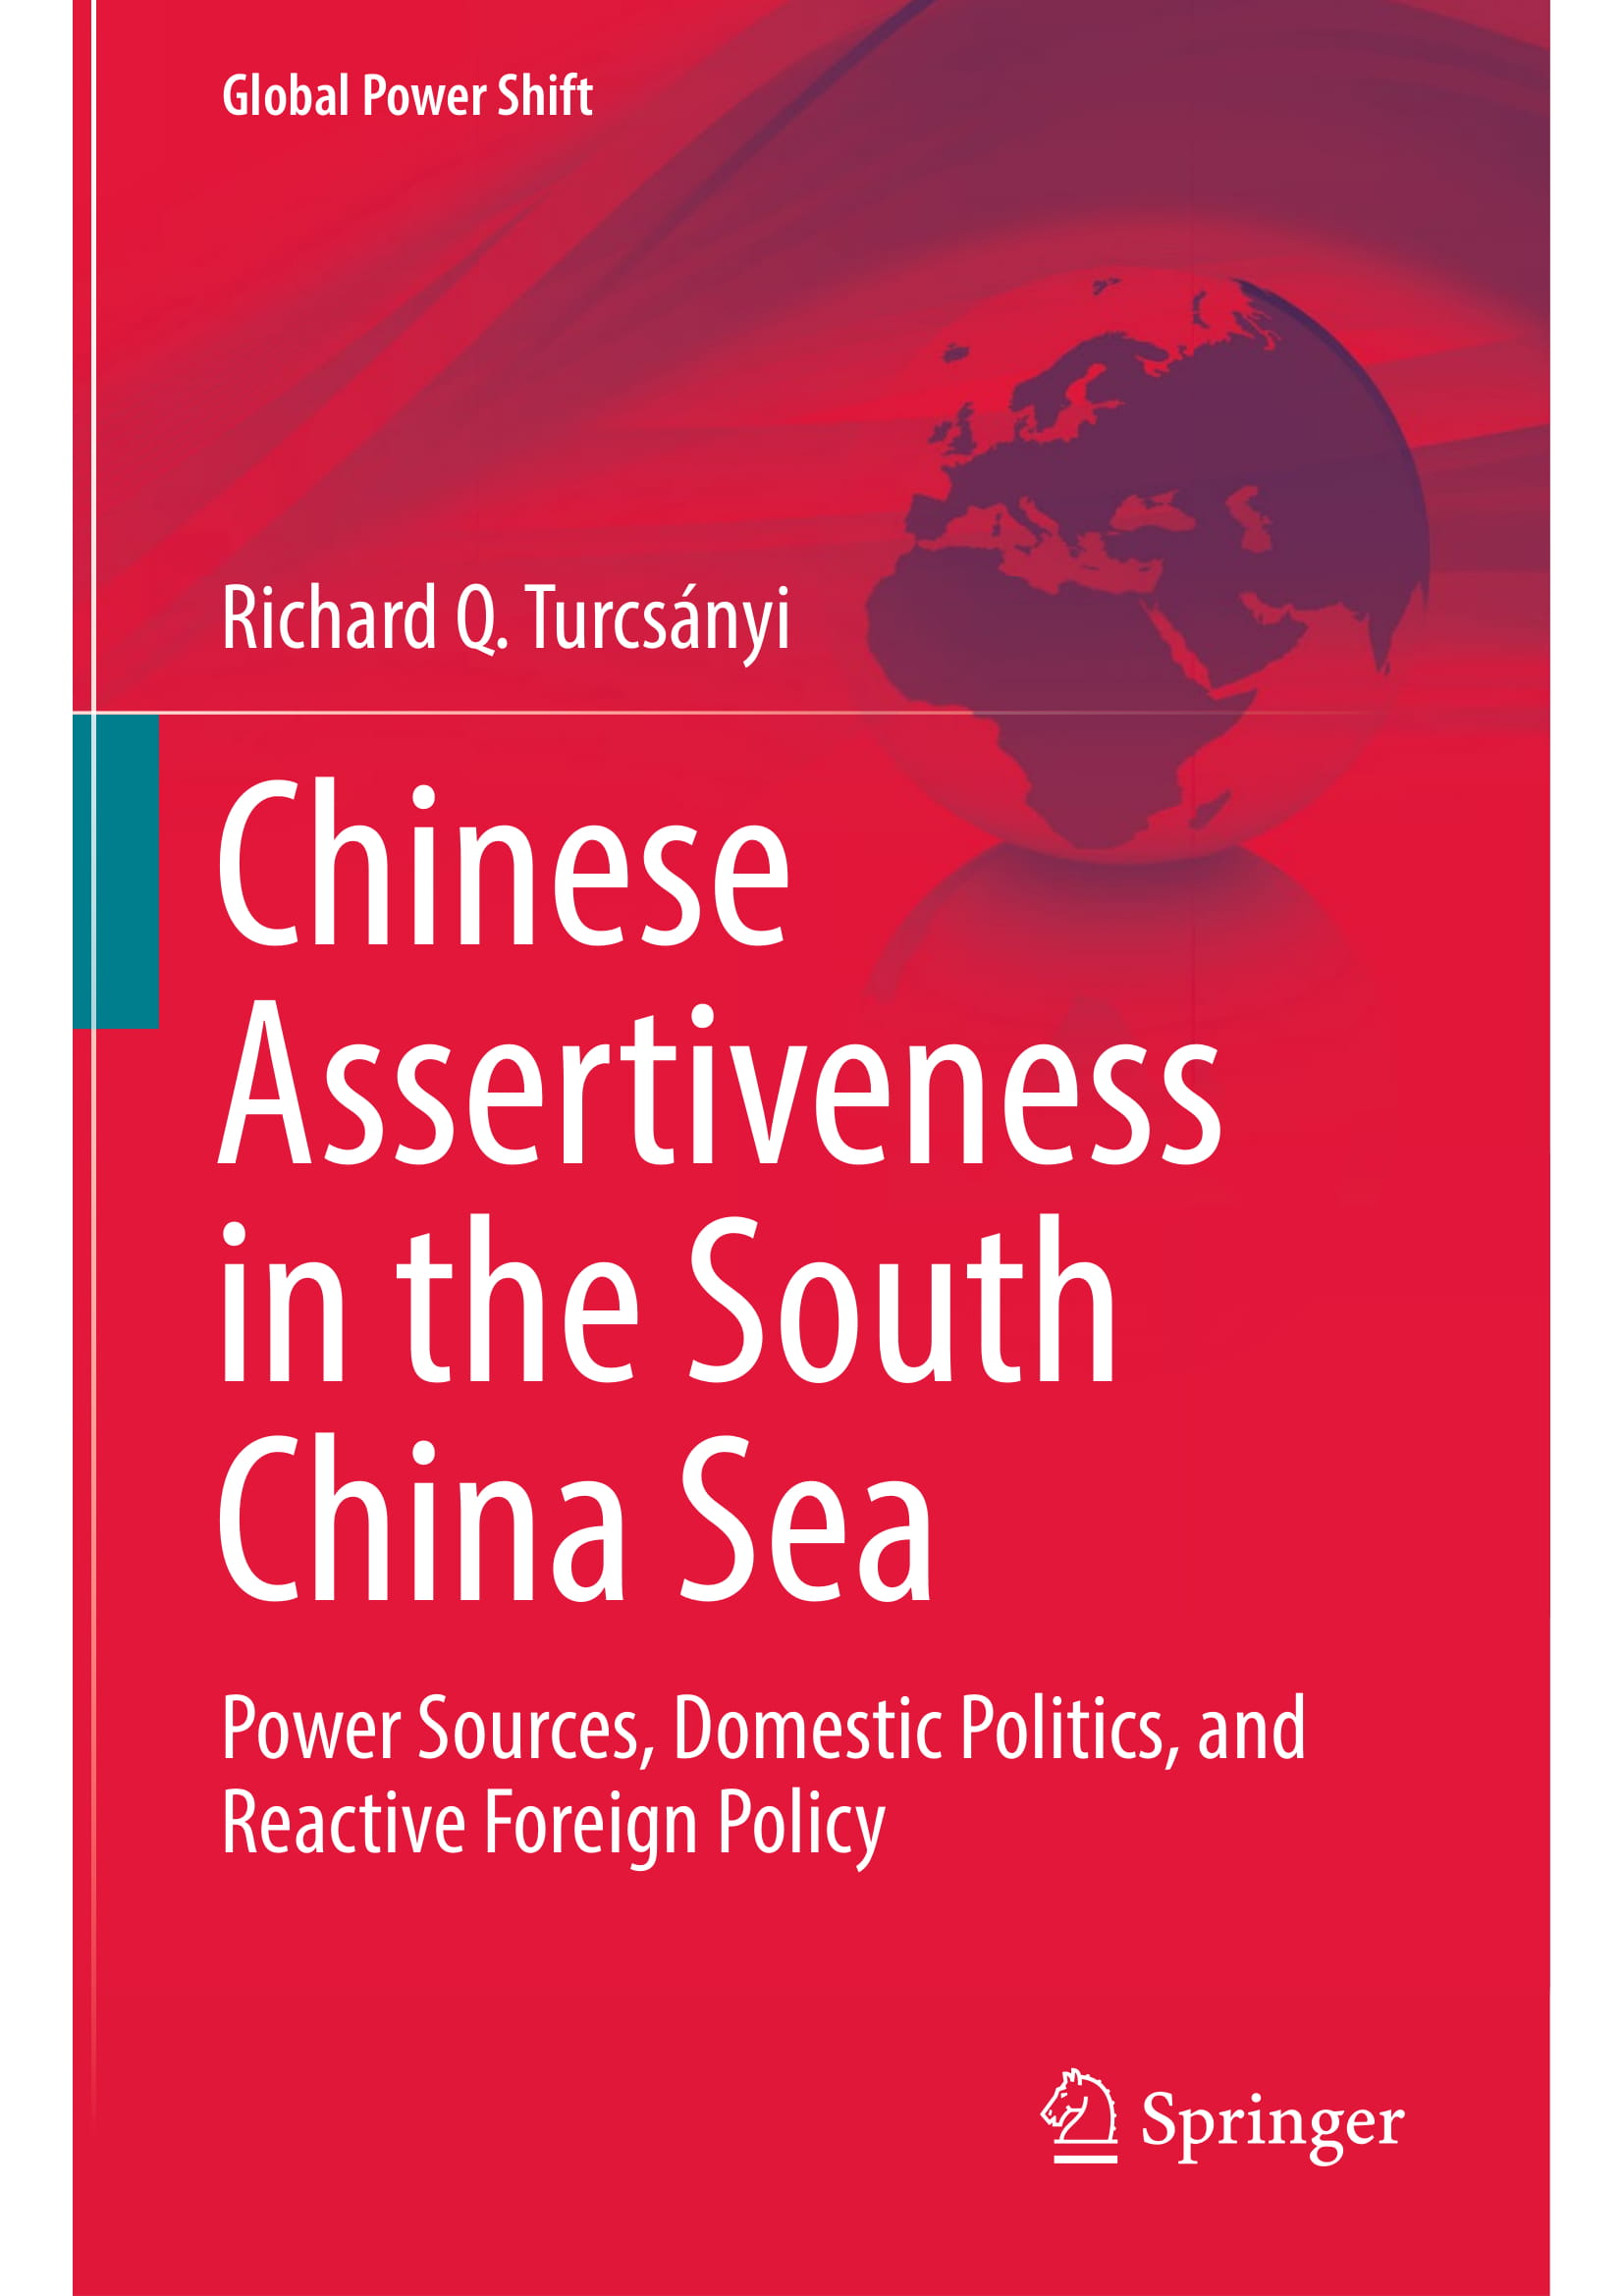 Chinese_Assertiveness_in_the_South_China-1.jpg